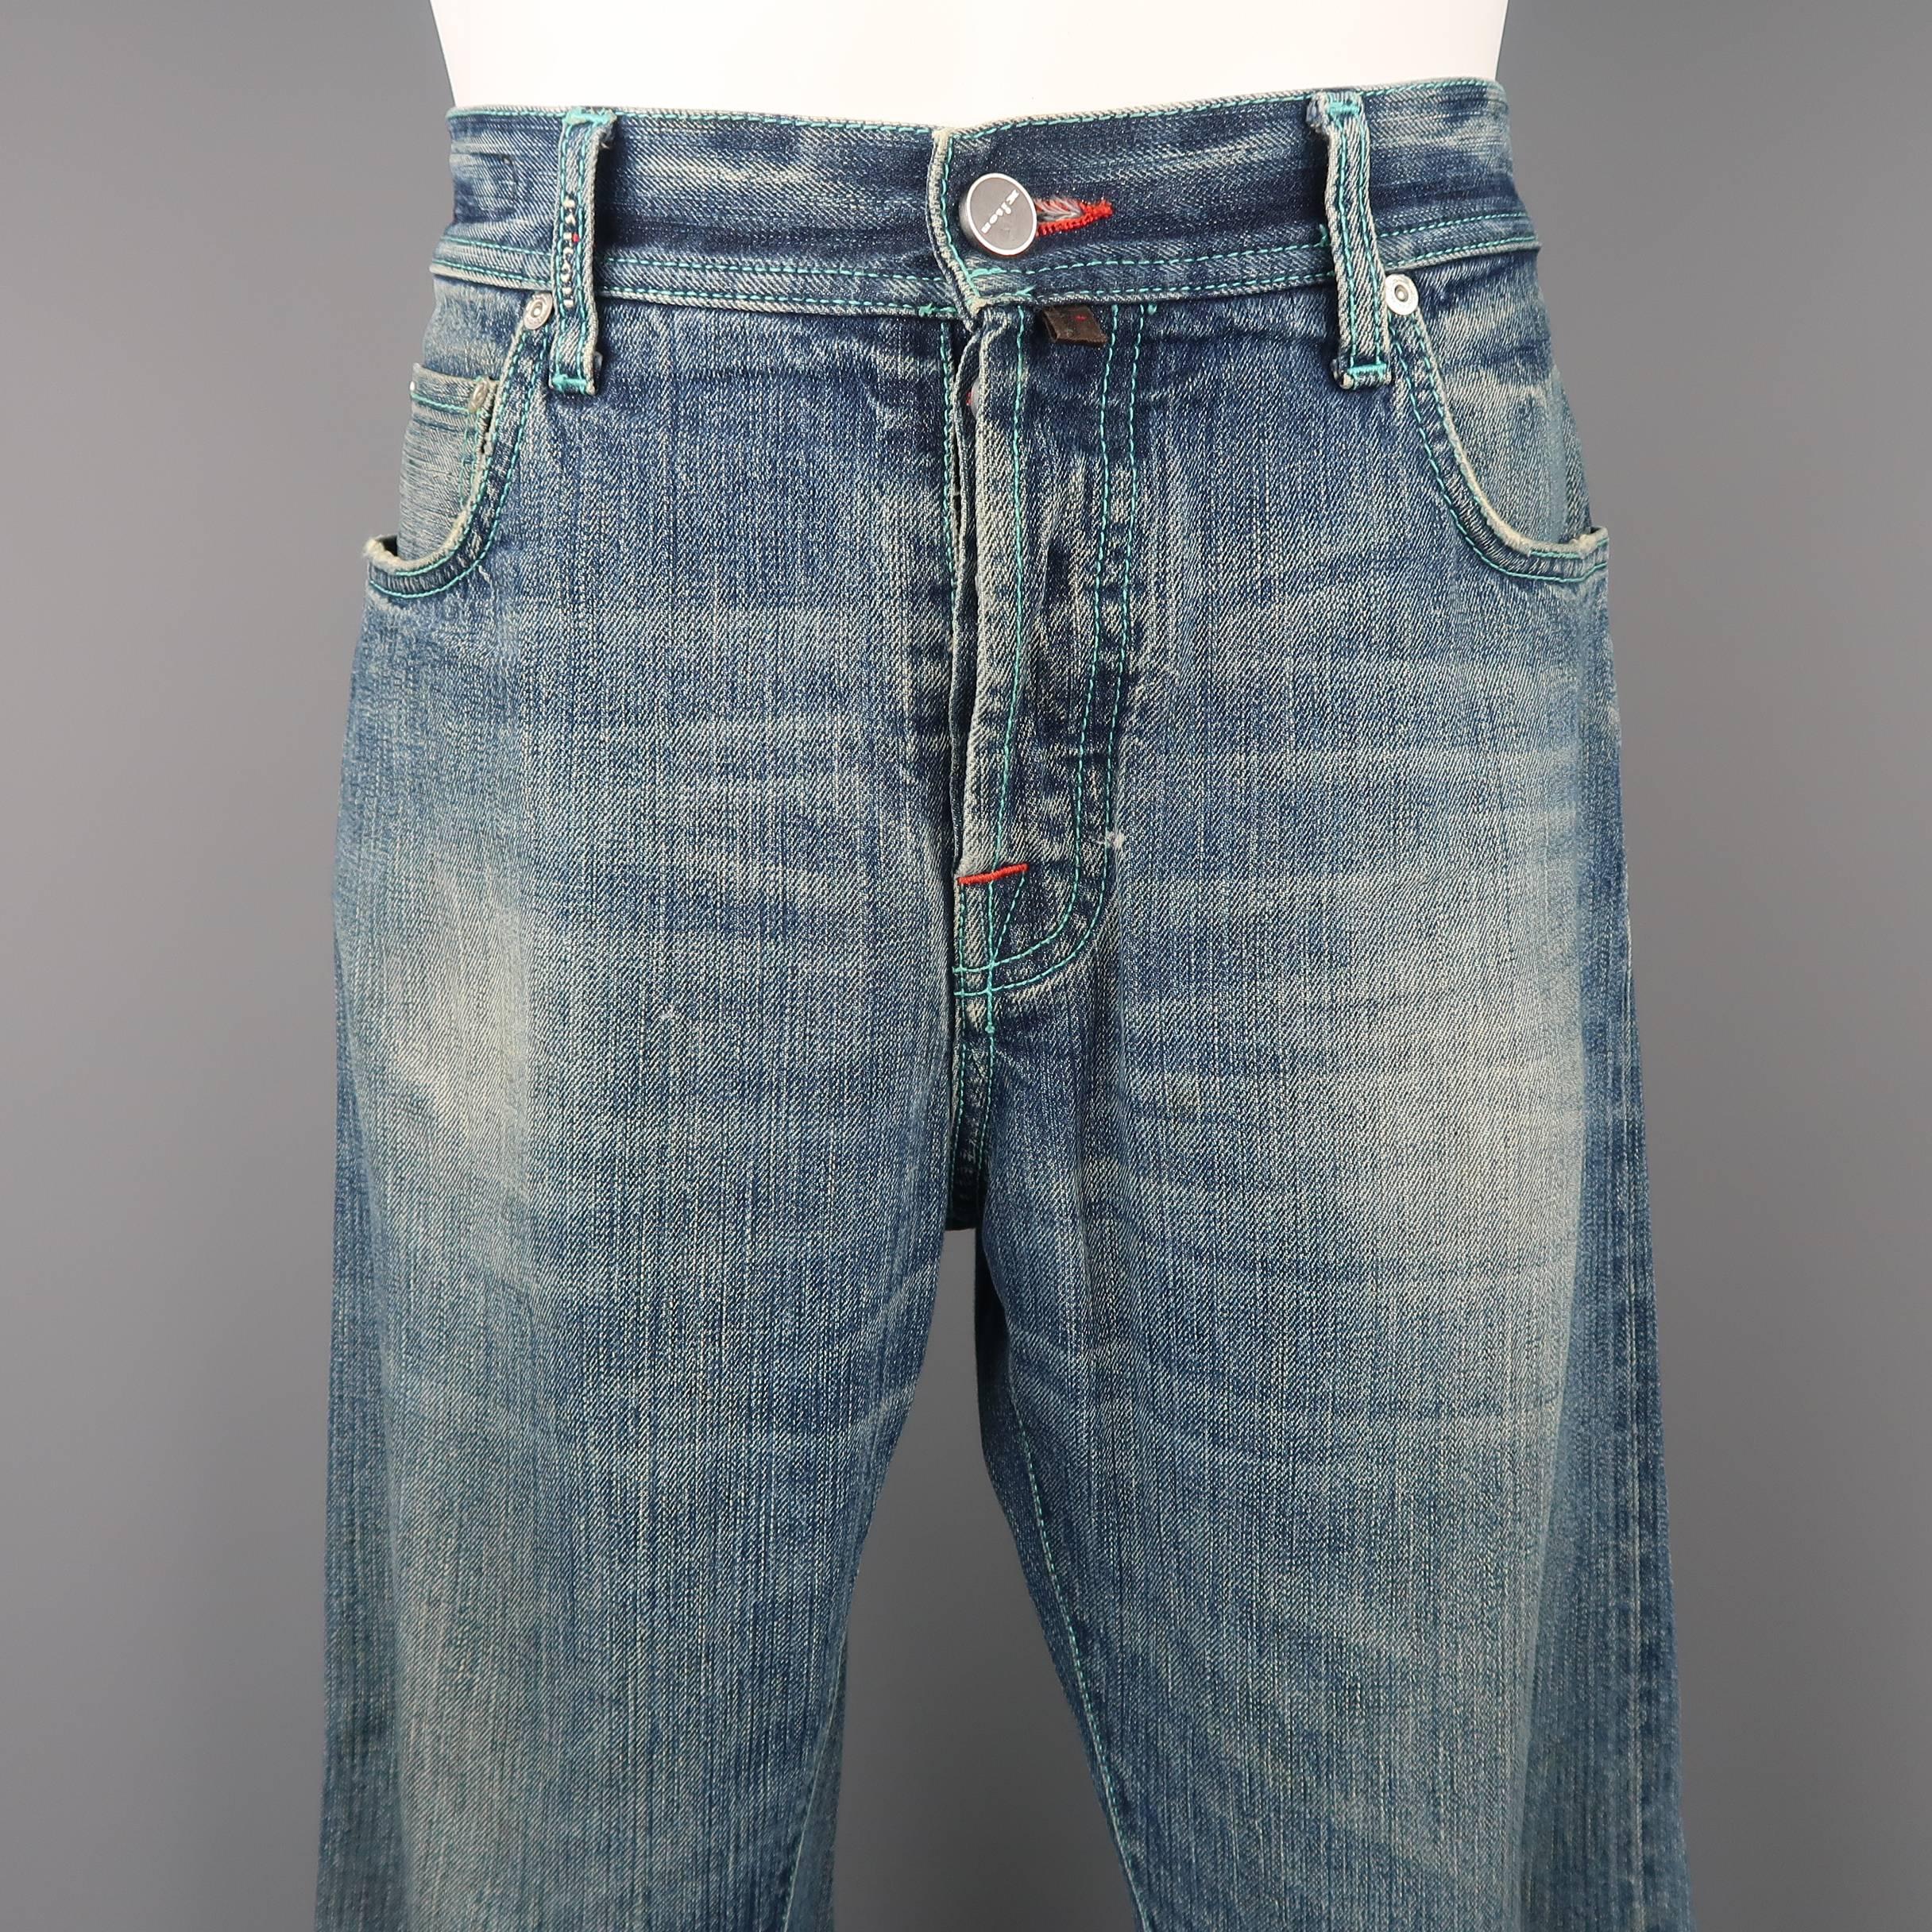 Limited Edition KITON jeans come in a dirty washed selvedge denim with enamel button fly and aqua contrast stitching. Made in Italy.
 
Fair Pre-Owned Condition.
Marked: 34 (5 out of 48)
 
Measurements:
 
Waist: 34 in.
Rise: 11 in.
Inseam: 29 in.
